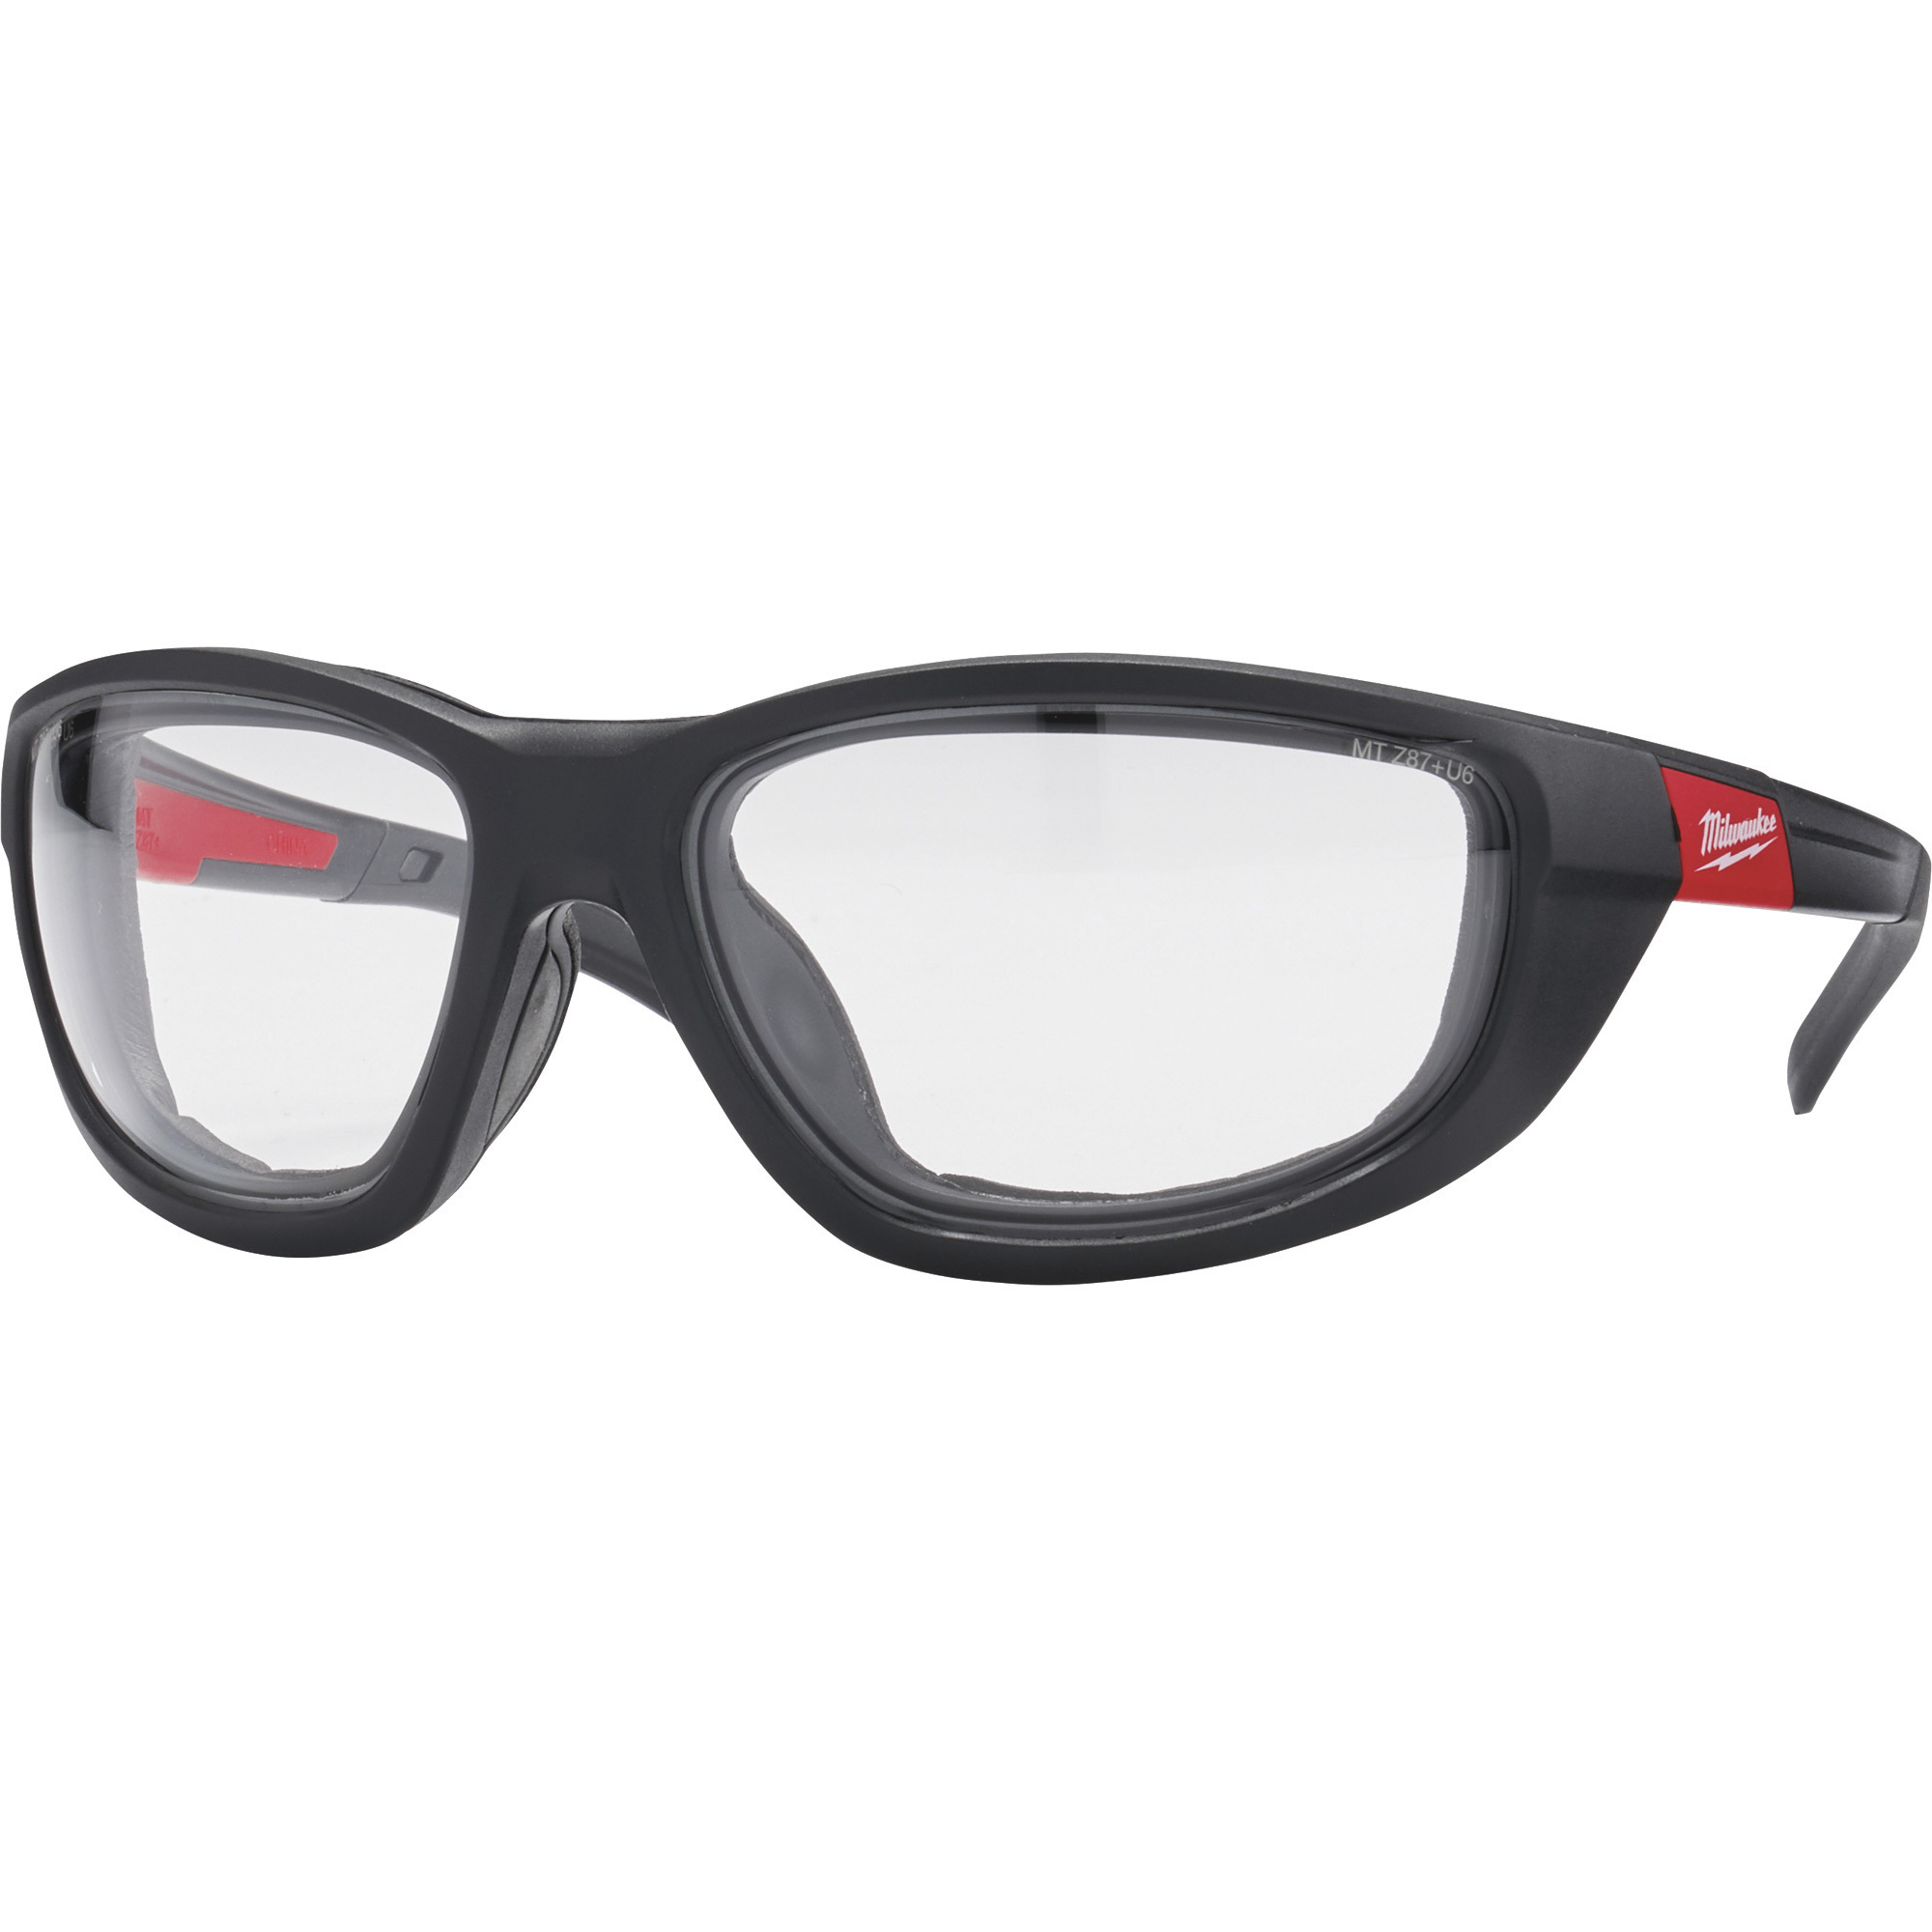 Milwaukee Indoor/Outdoor Military Grade Safety Glasses with Gaskets, Clear Lenses, Black/Red Frames, Model 48-73-2040